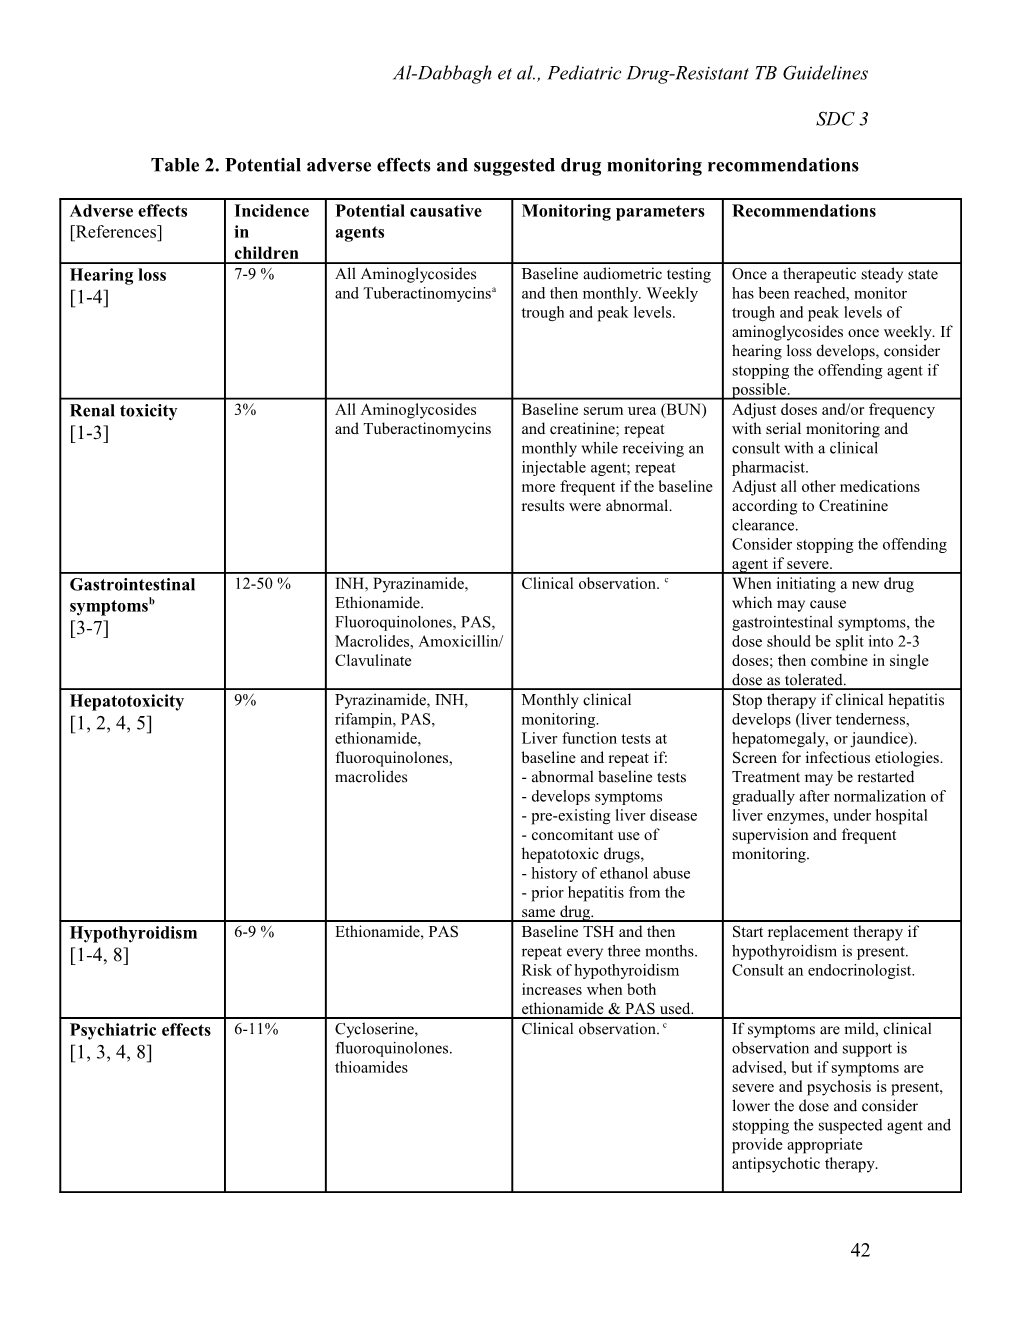 Table 2. Potential Adverse Effects and Suggested Drug Monitoring Recommendations